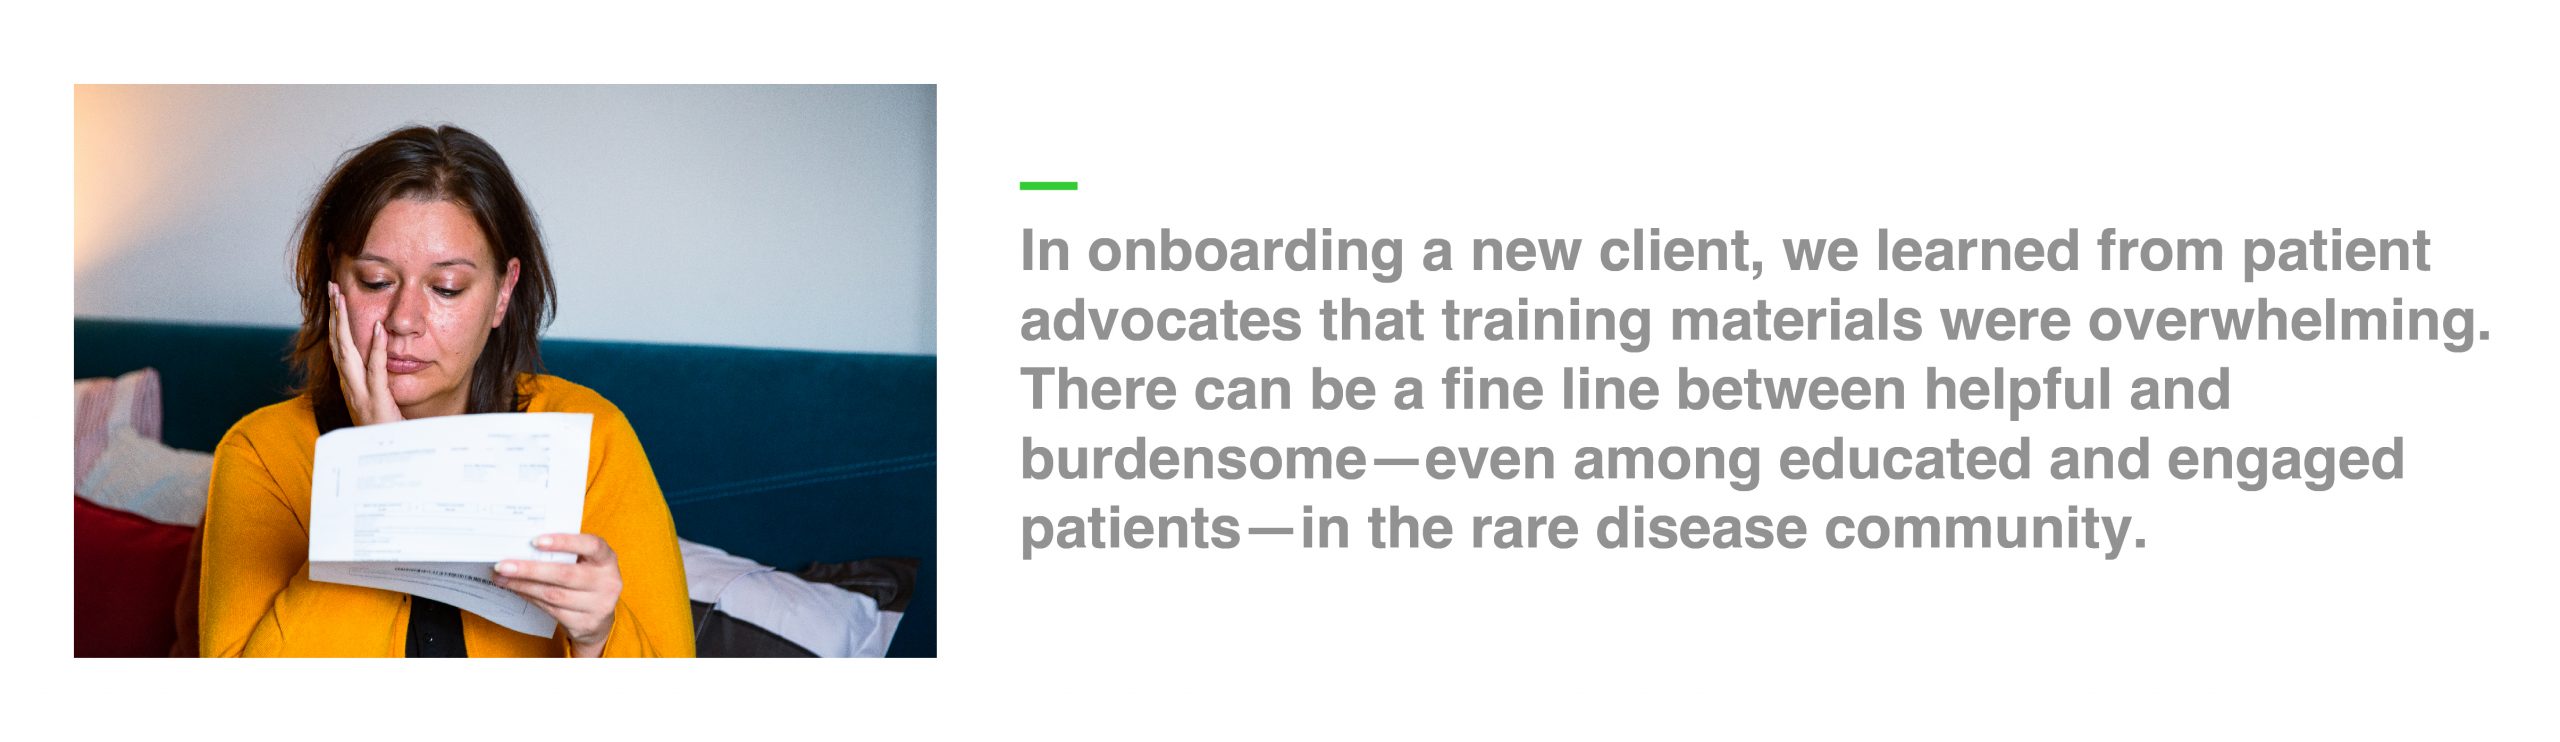 In onboarding a new client, we learned from patient advocates that training materials were overwhelming. There can be a fine line between helpful and burdensome—even among educated and engaged patients—in the rare disease community.